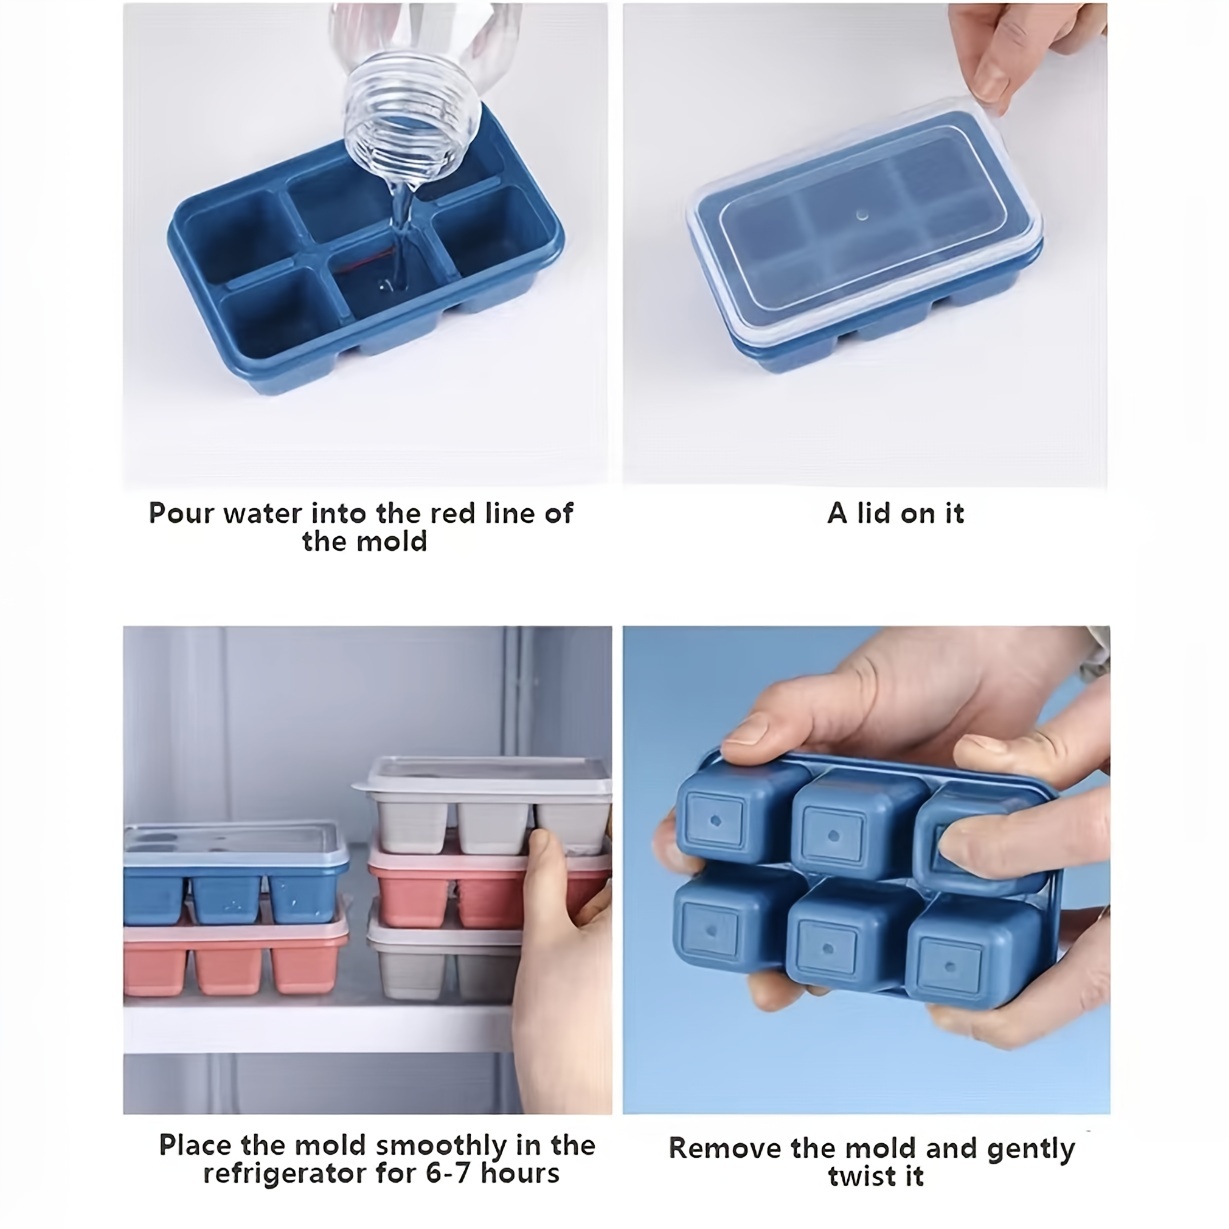 Christmas Decorations Hexagon Round Ice Cube Tray With Lid Mini